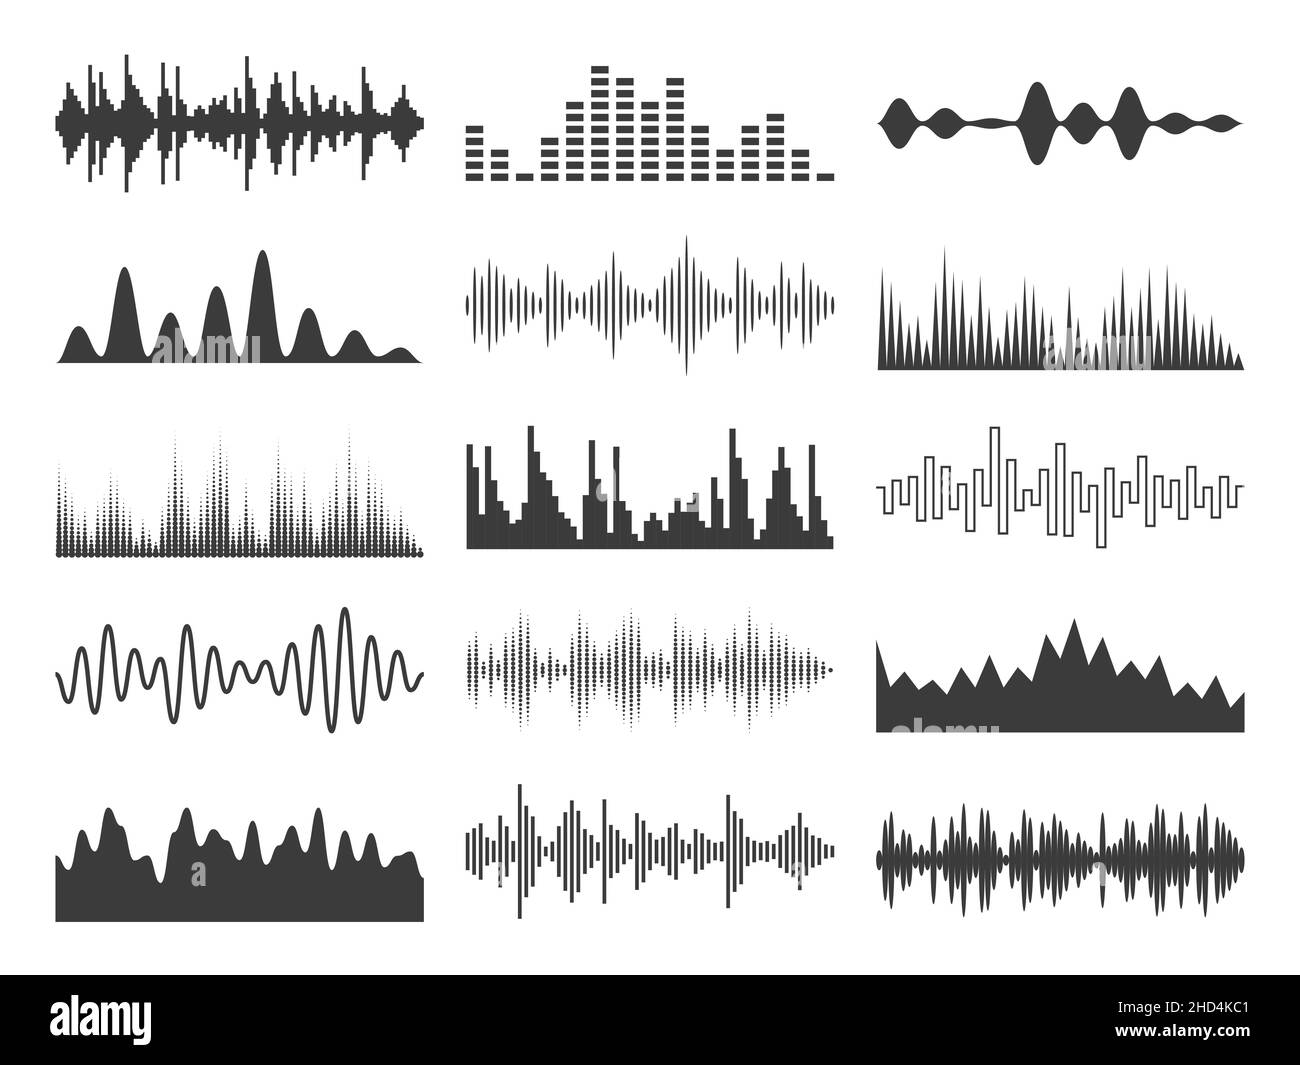 Black sound waves. Music tracks. Beats graphic presentation. Electronic audio signals frequency. Stereo signals forms. Musical recorder abstract Stock Vector